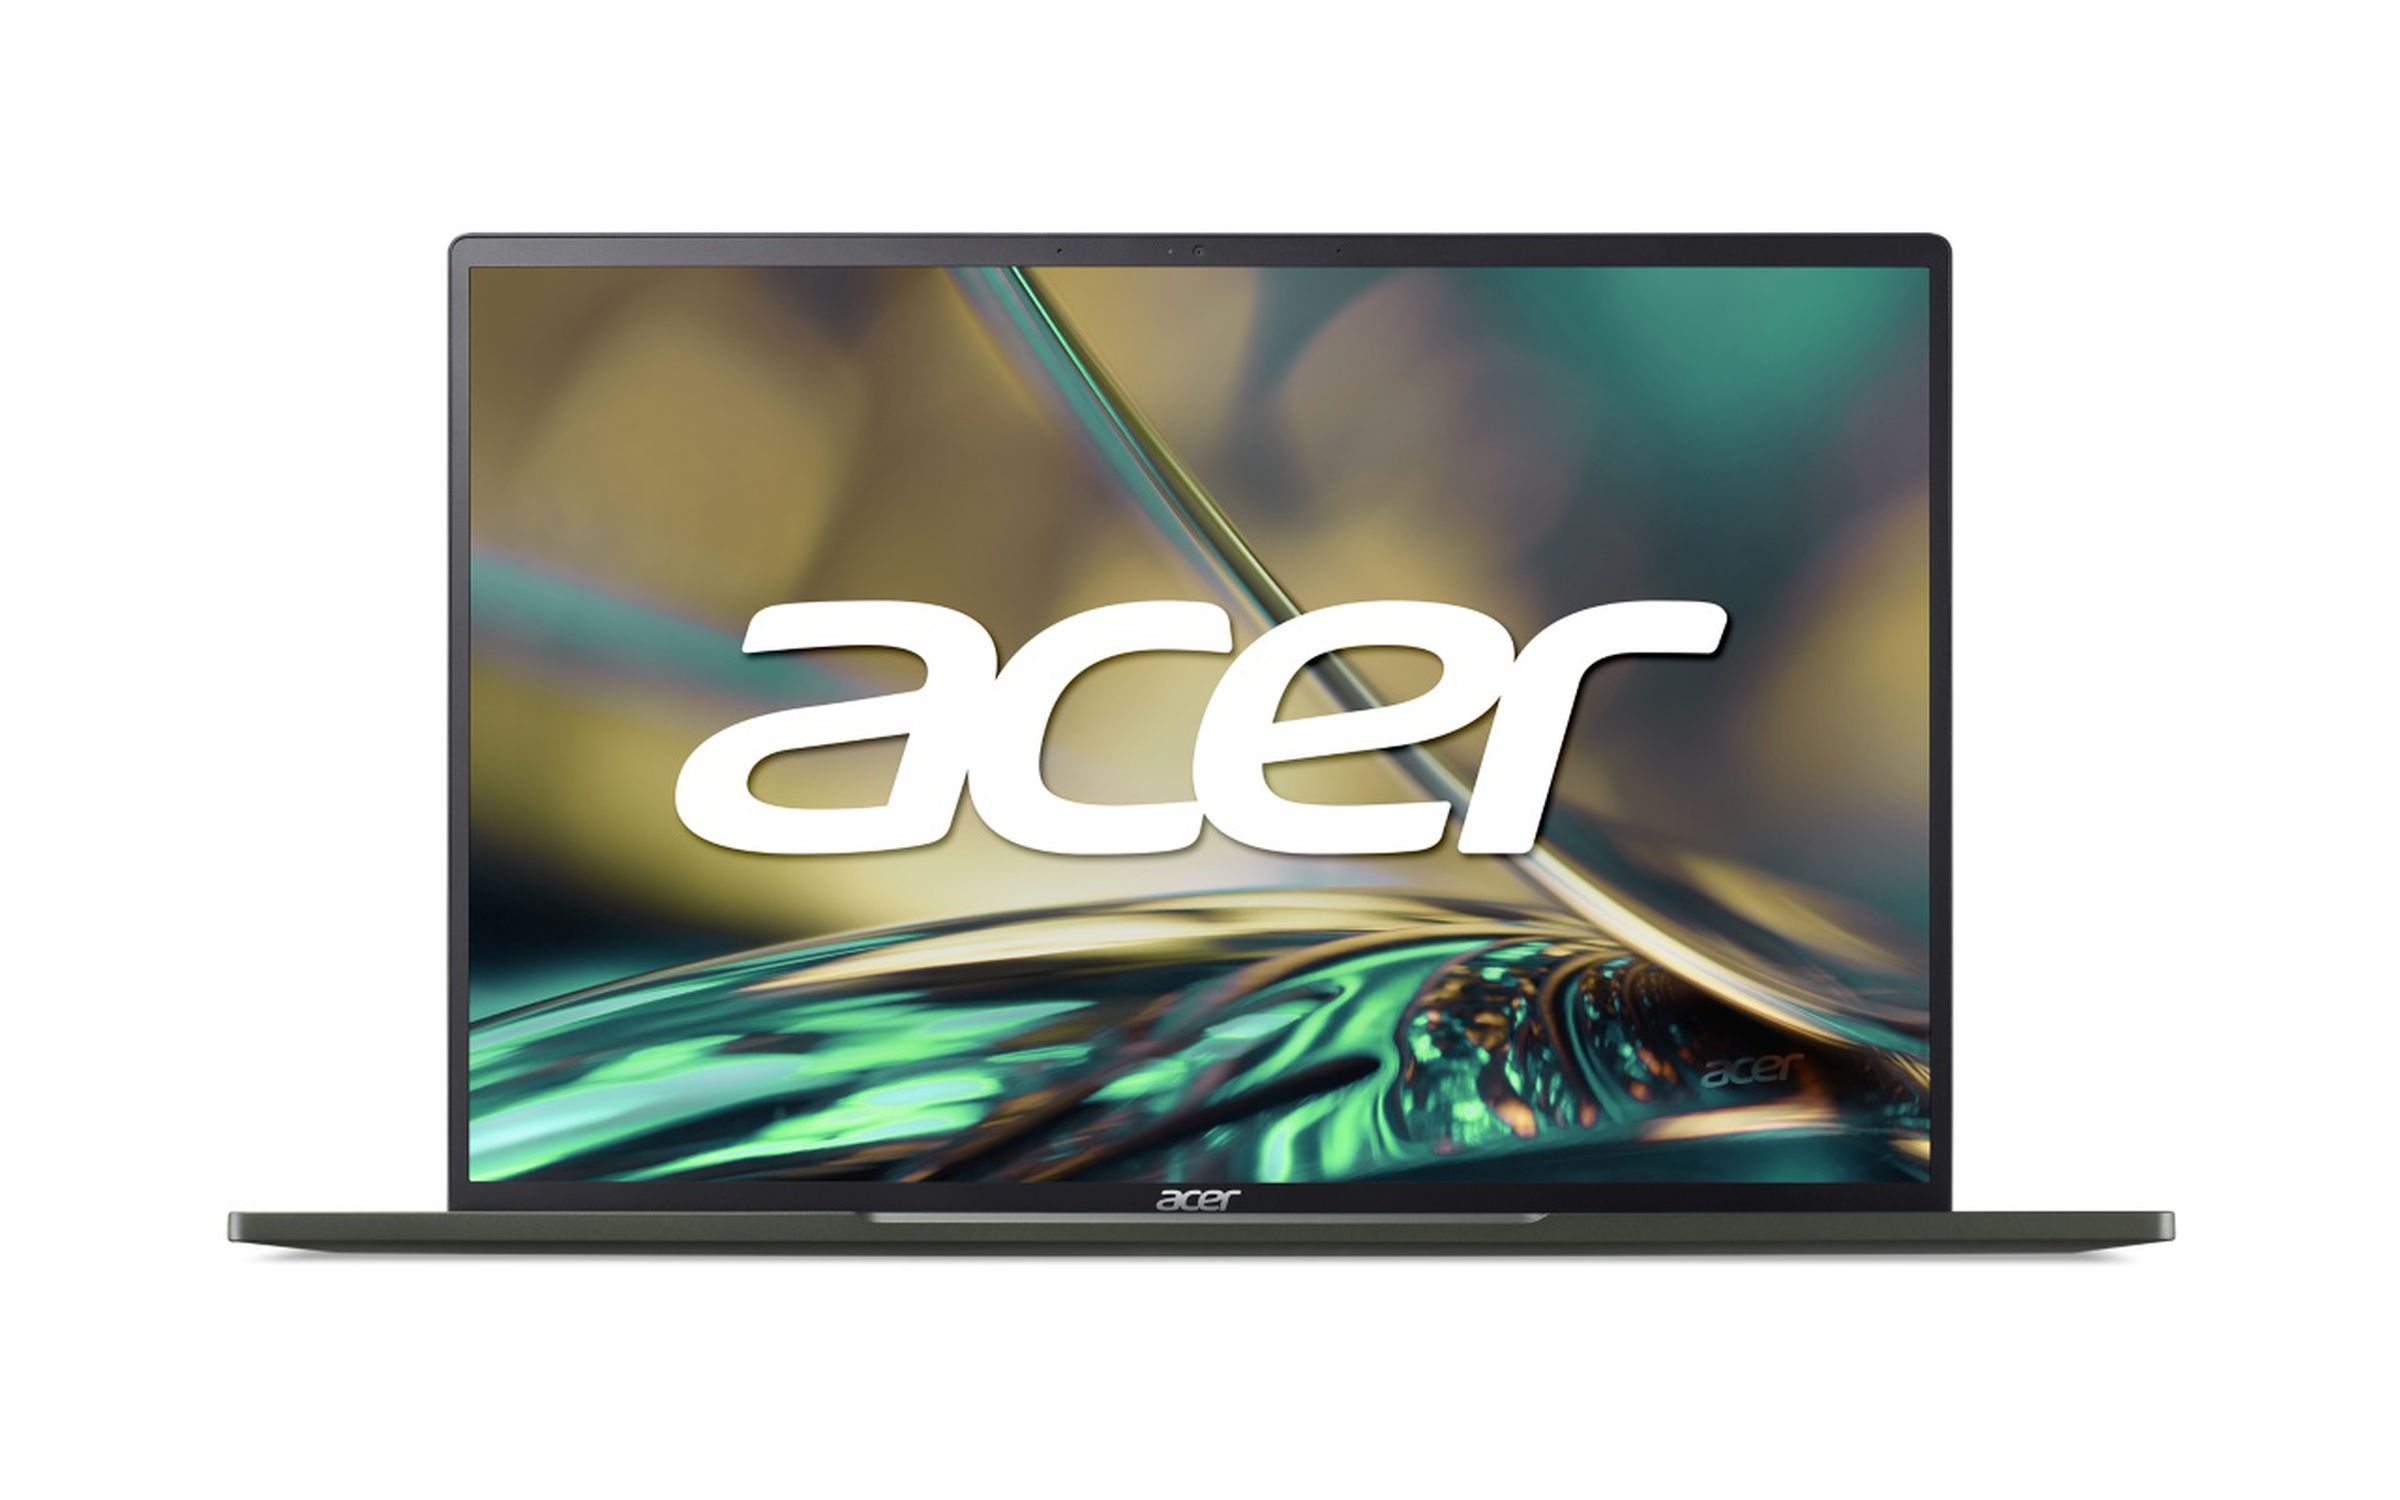 The Acer Swift Edge on a white background, open. The screen displays the Acer logo over running water.